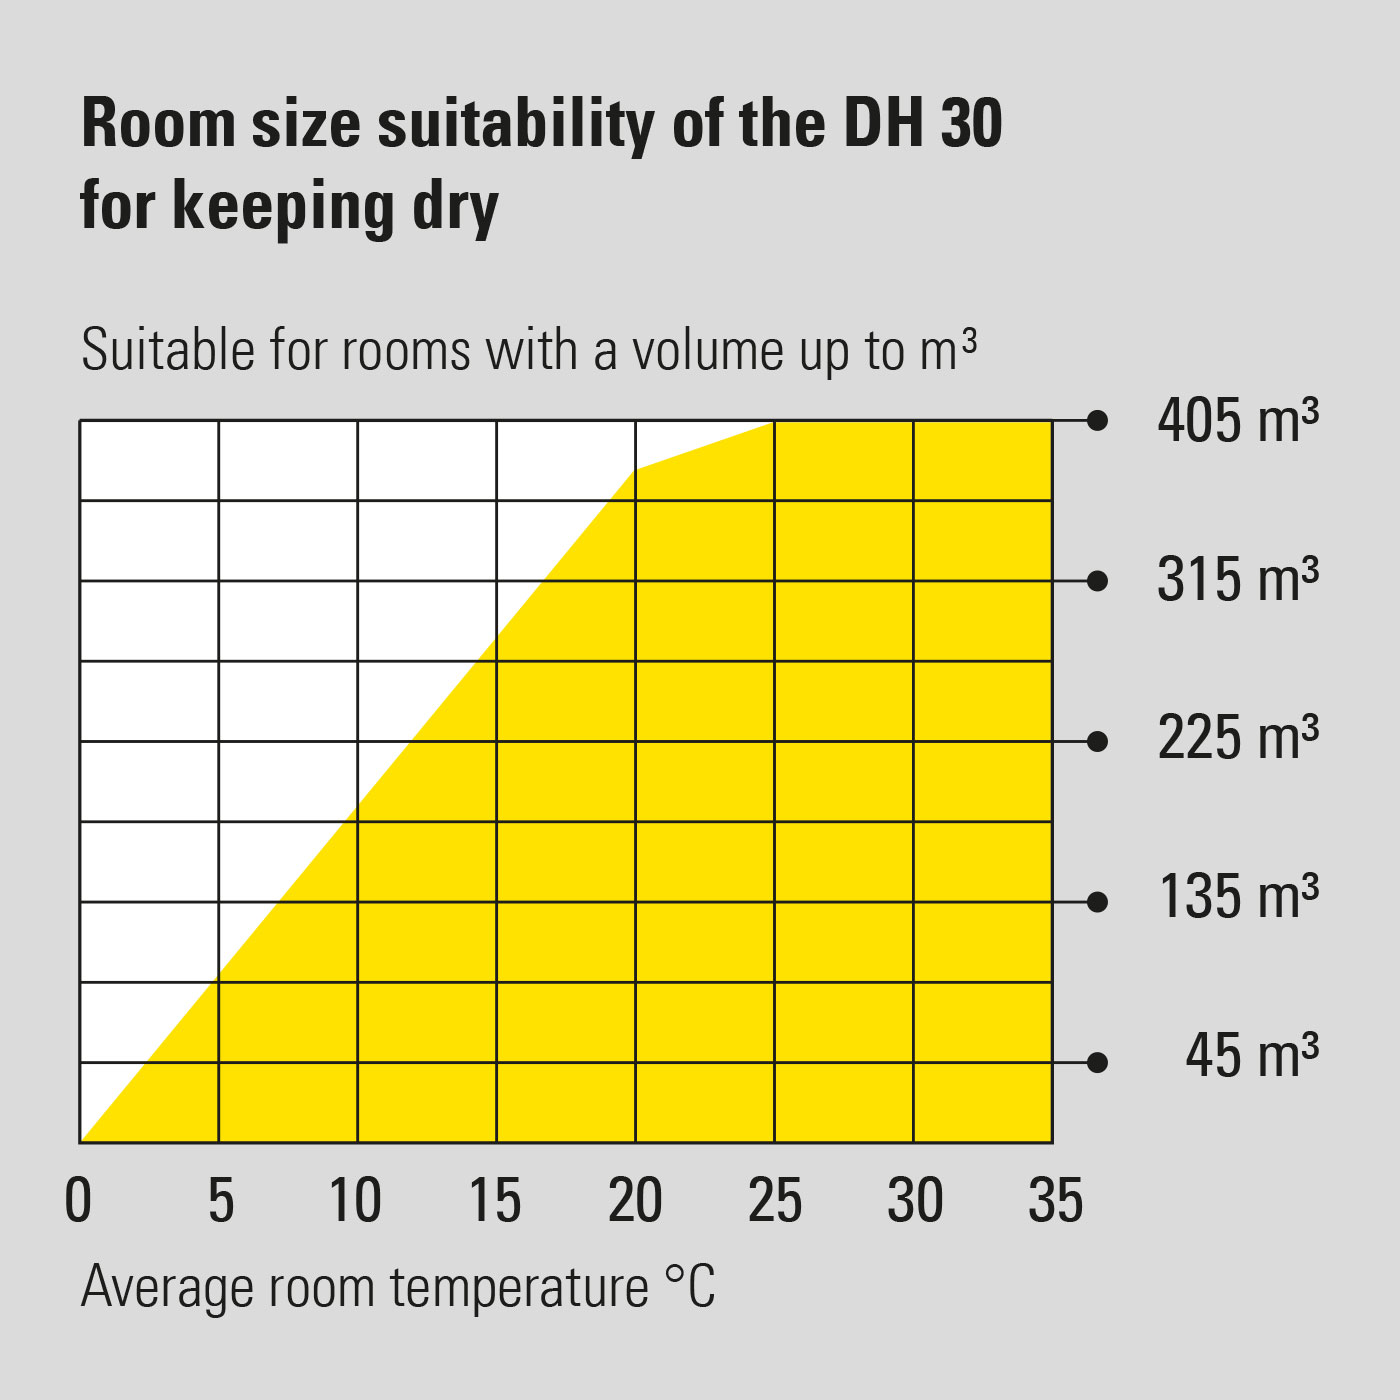 Room size suitability of the DH 30 for dry keeping